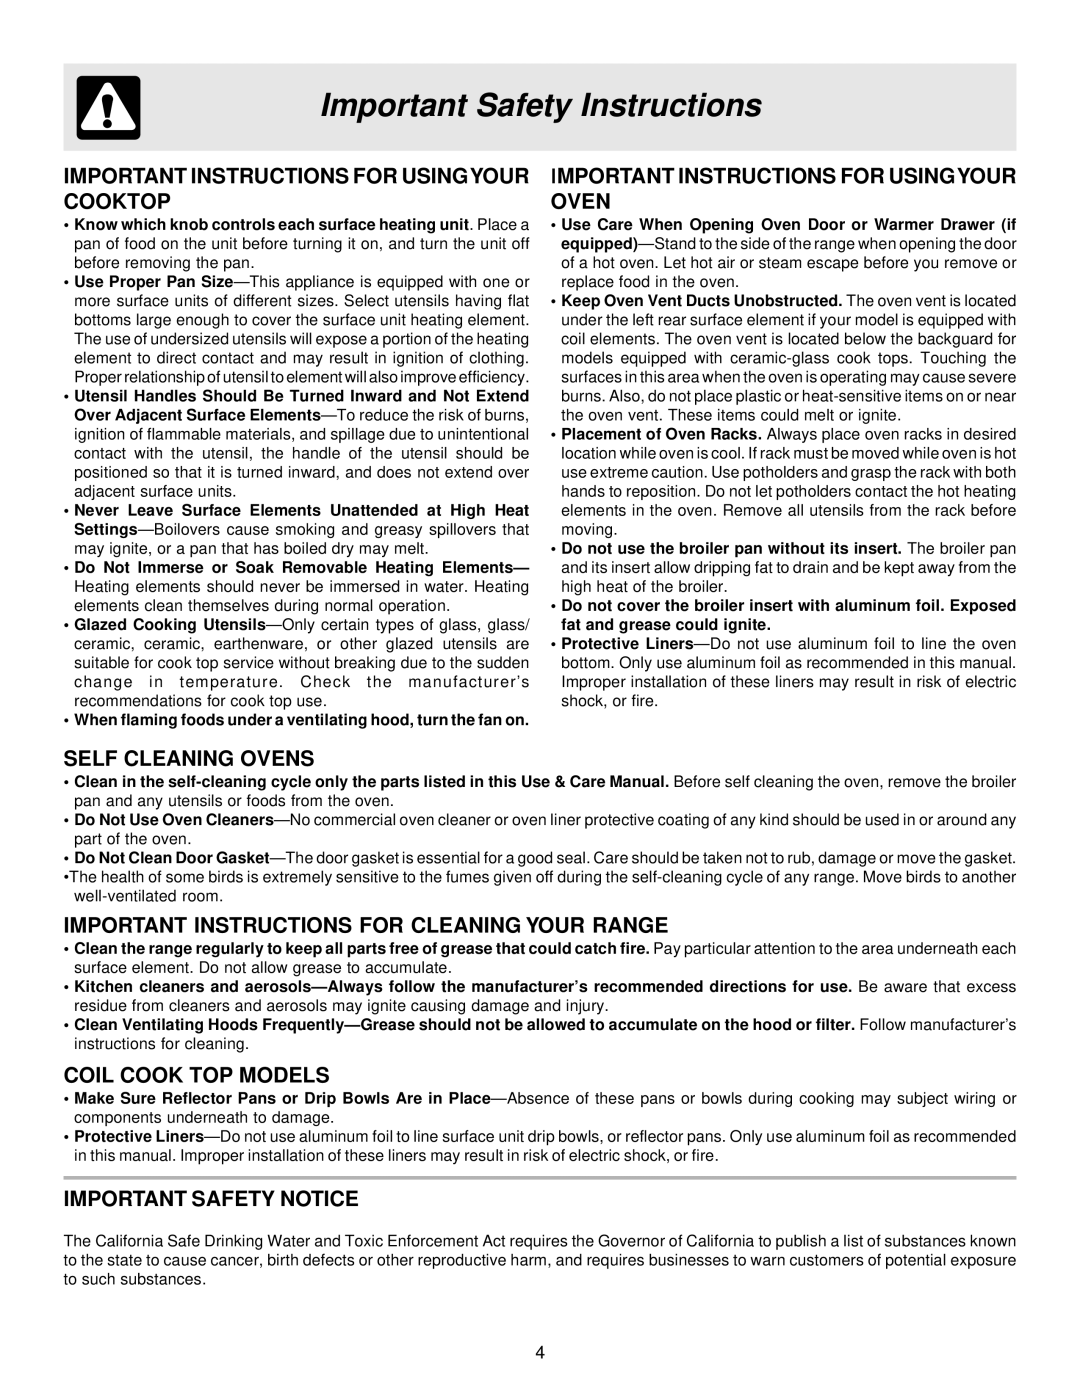 White-Westinghouse ES200/300 manual Important Instructions For Usingyour Cooktop, Important Instructions For Usingyour Oven 